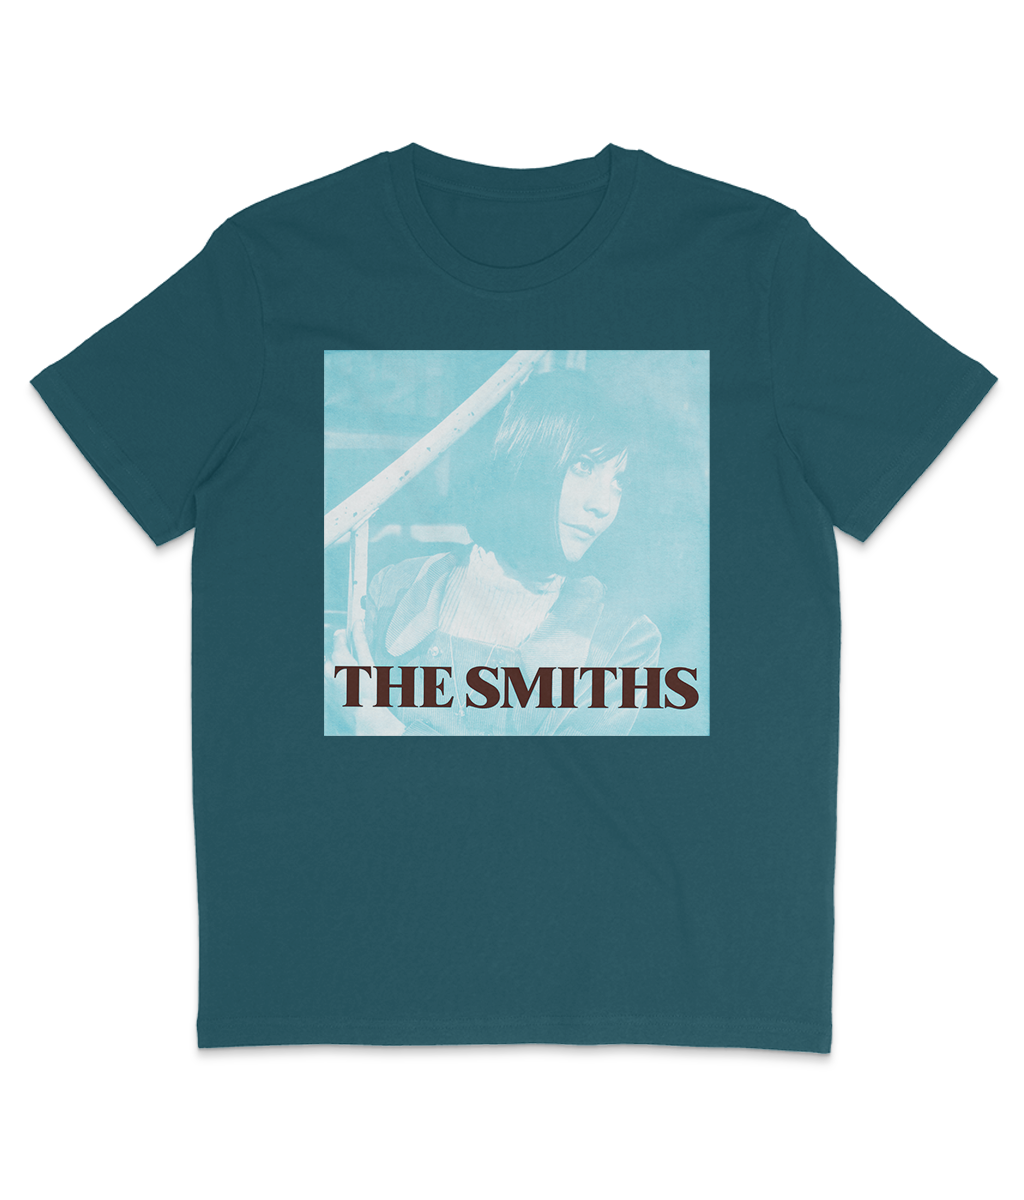 THE SMITHS - There Is A Light That Never Goes Out - 1992 - UK